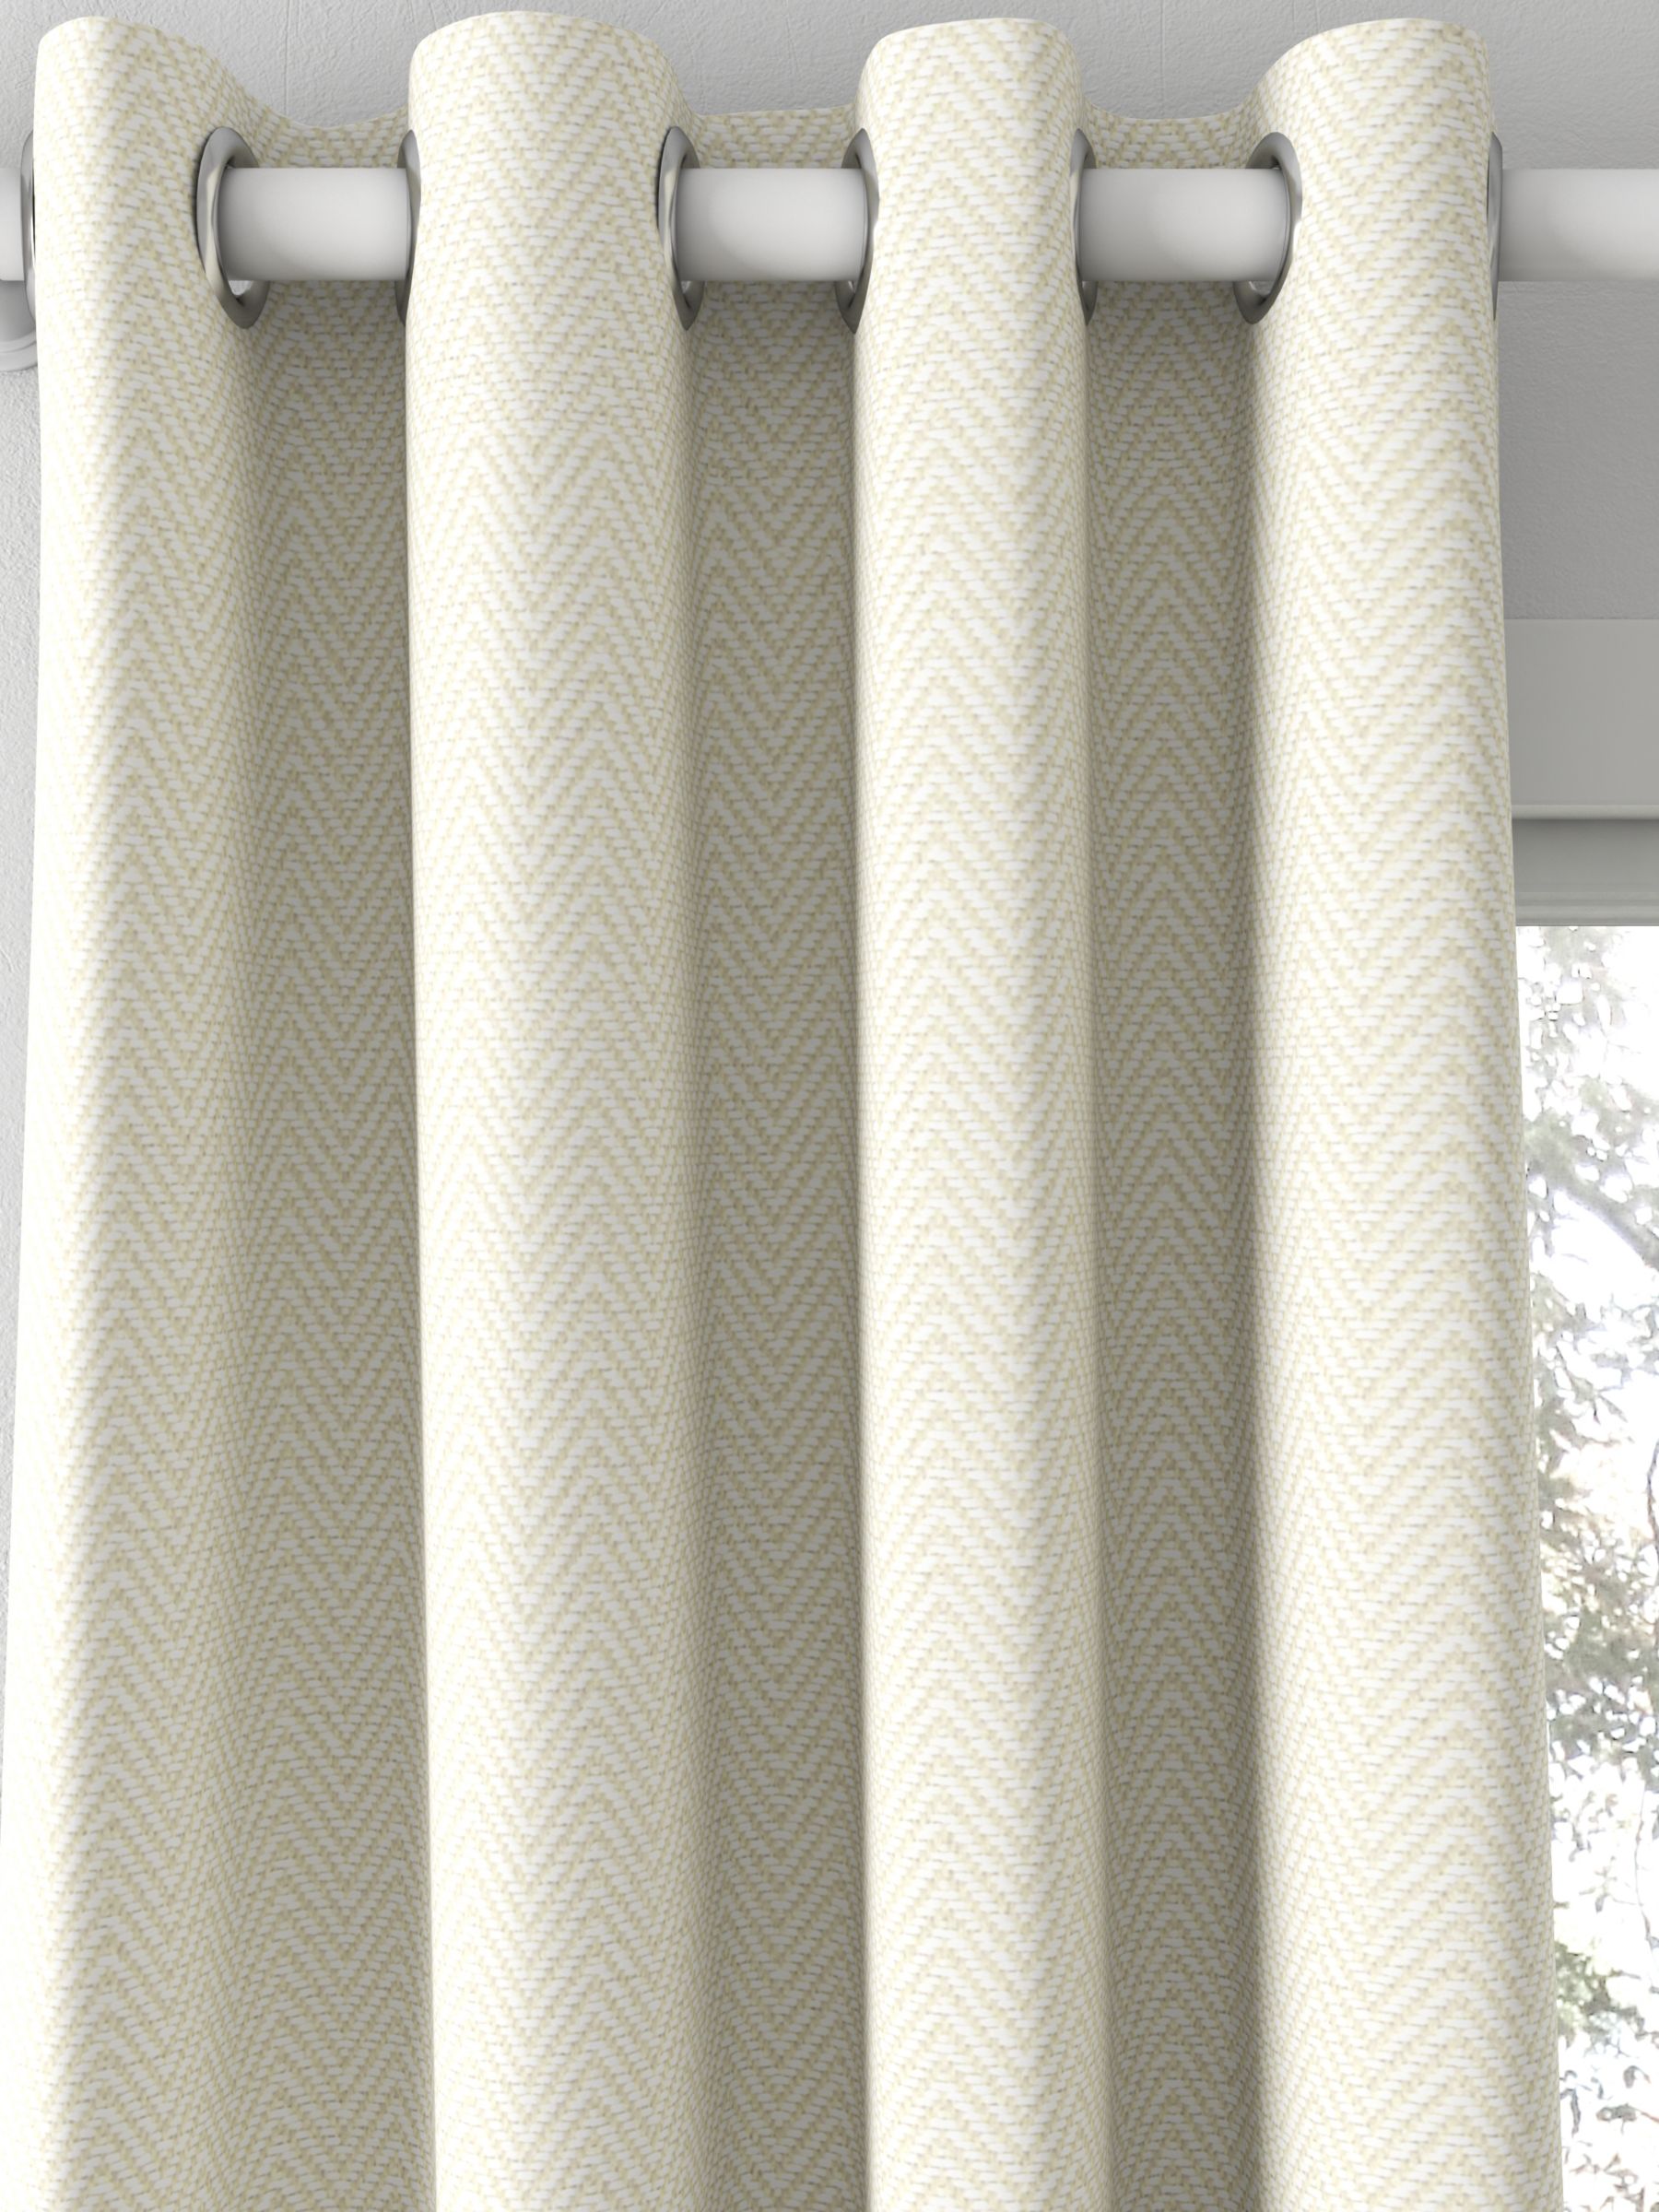 John Lewis & Partners Herringbone Made to Measure Curtains, Putty at